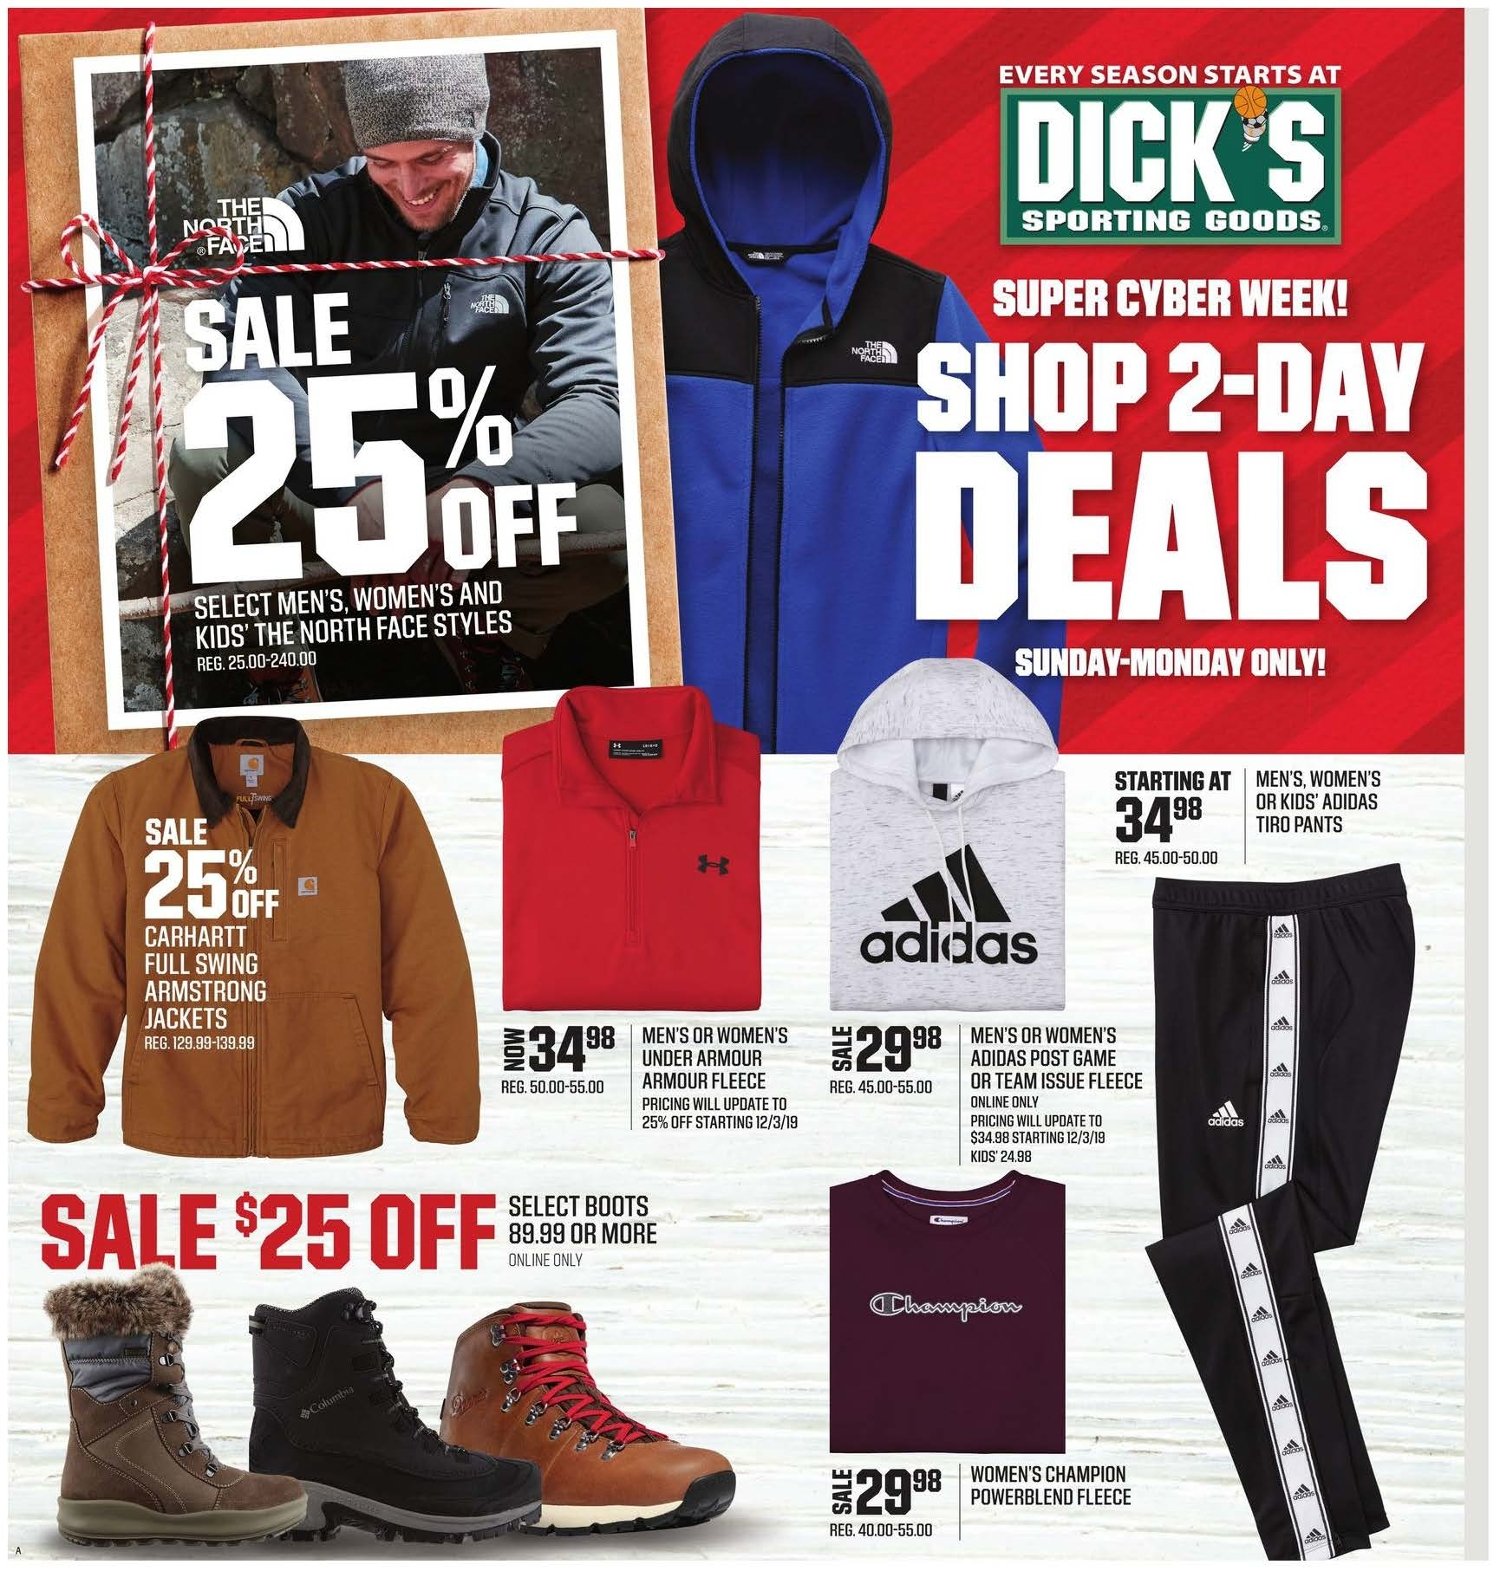 Whats new at dick's sporting goods for northface jackets